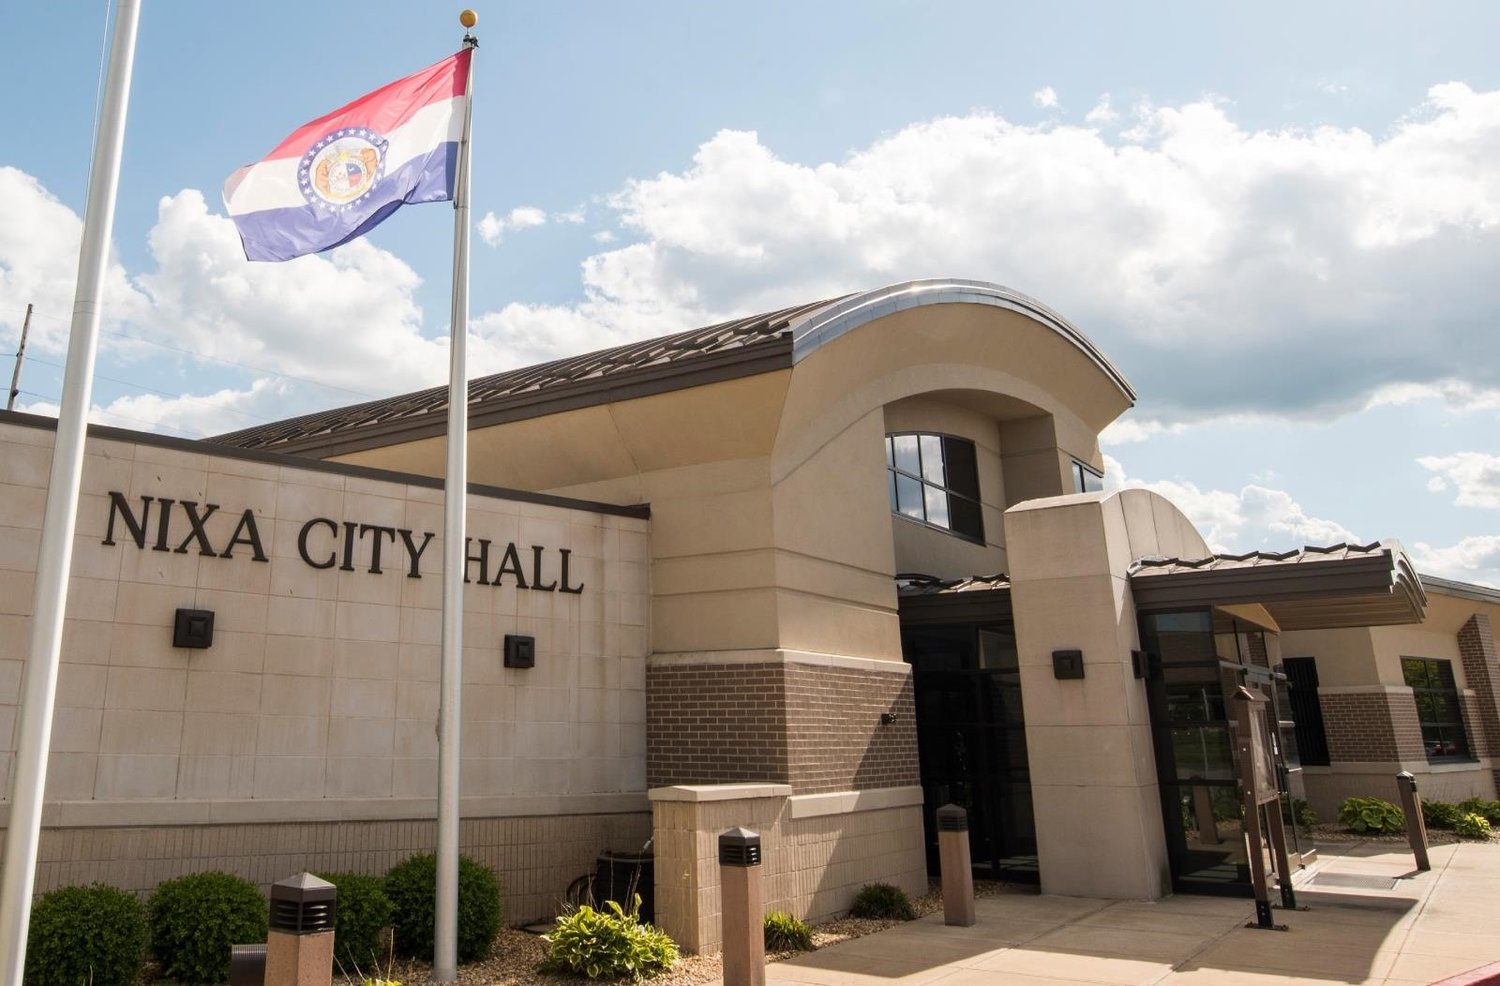 The city of Nixa is seeking candidates to apply for an open council seat.